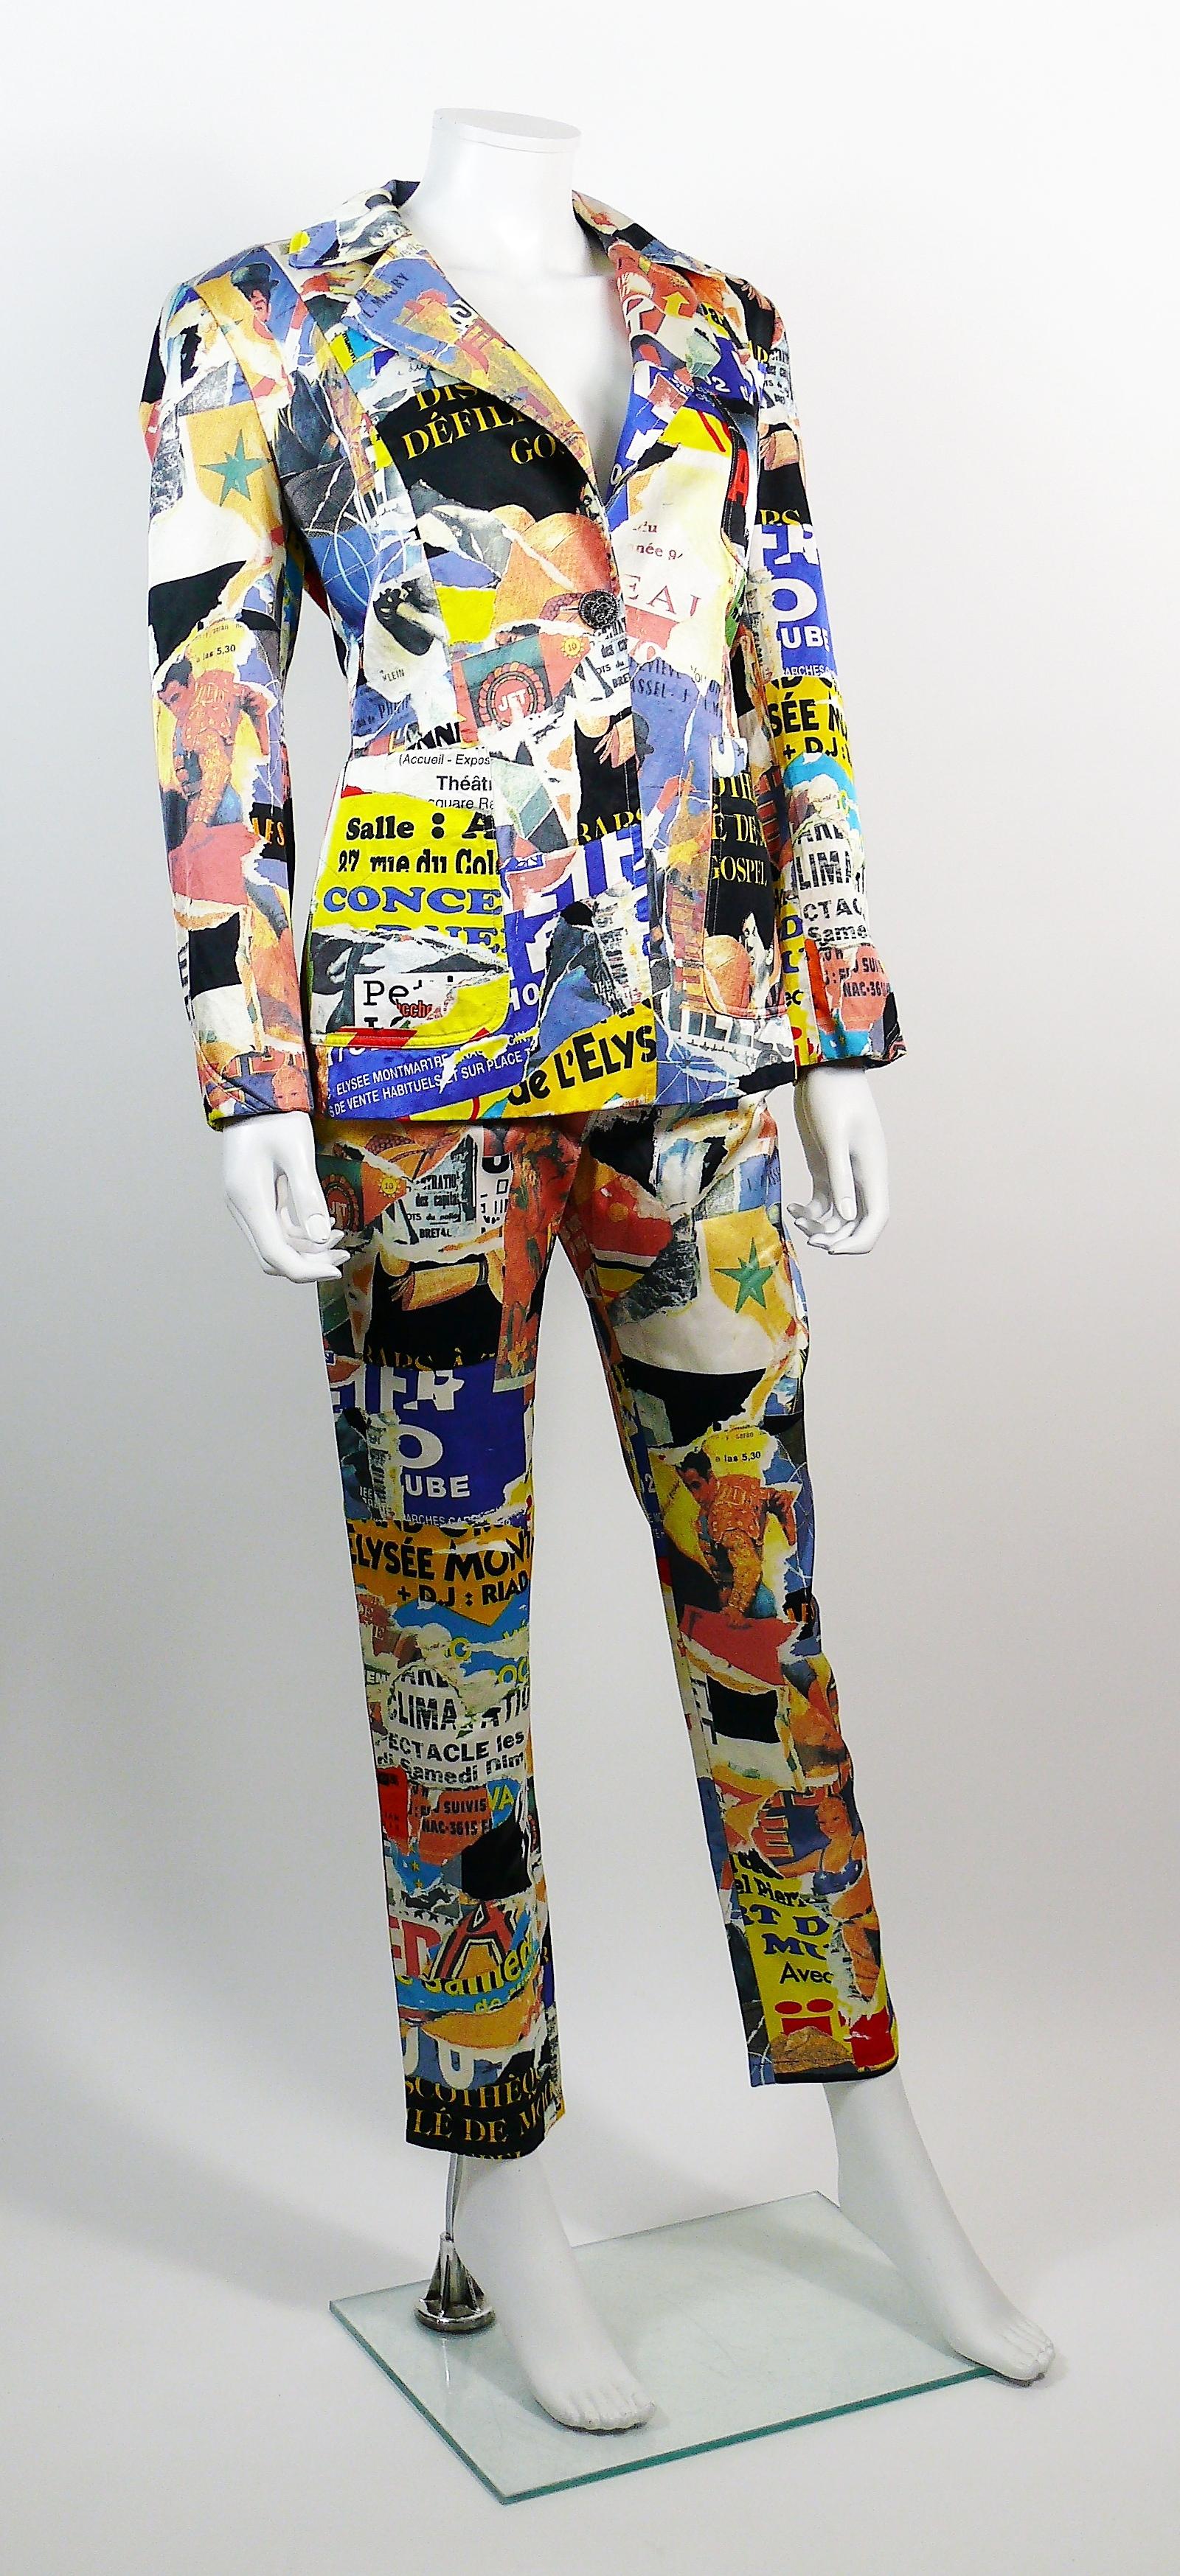 CHRISTIAN LACROIX vintage rare colourful Pop Art blazer and pant suit featuring a stunning lacerated retro poster print all over in vibrant colors.

Label reads BAZAR de CHRISTIAN LACROIX.
Made in France.

BLAZER
Missing size label (please refer to